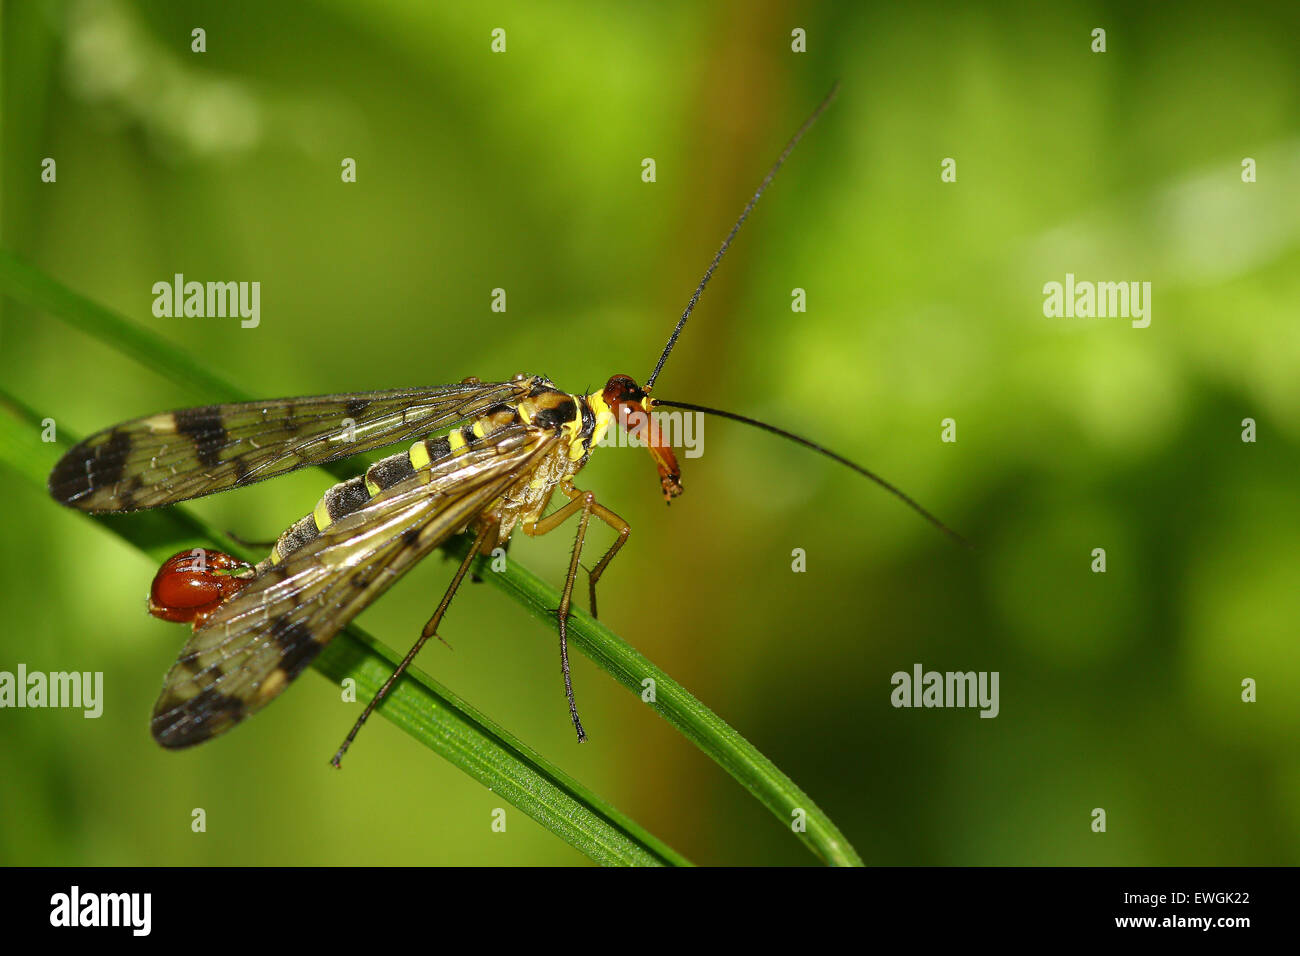 Scorpion fly on a strand of green grass Stock Photo